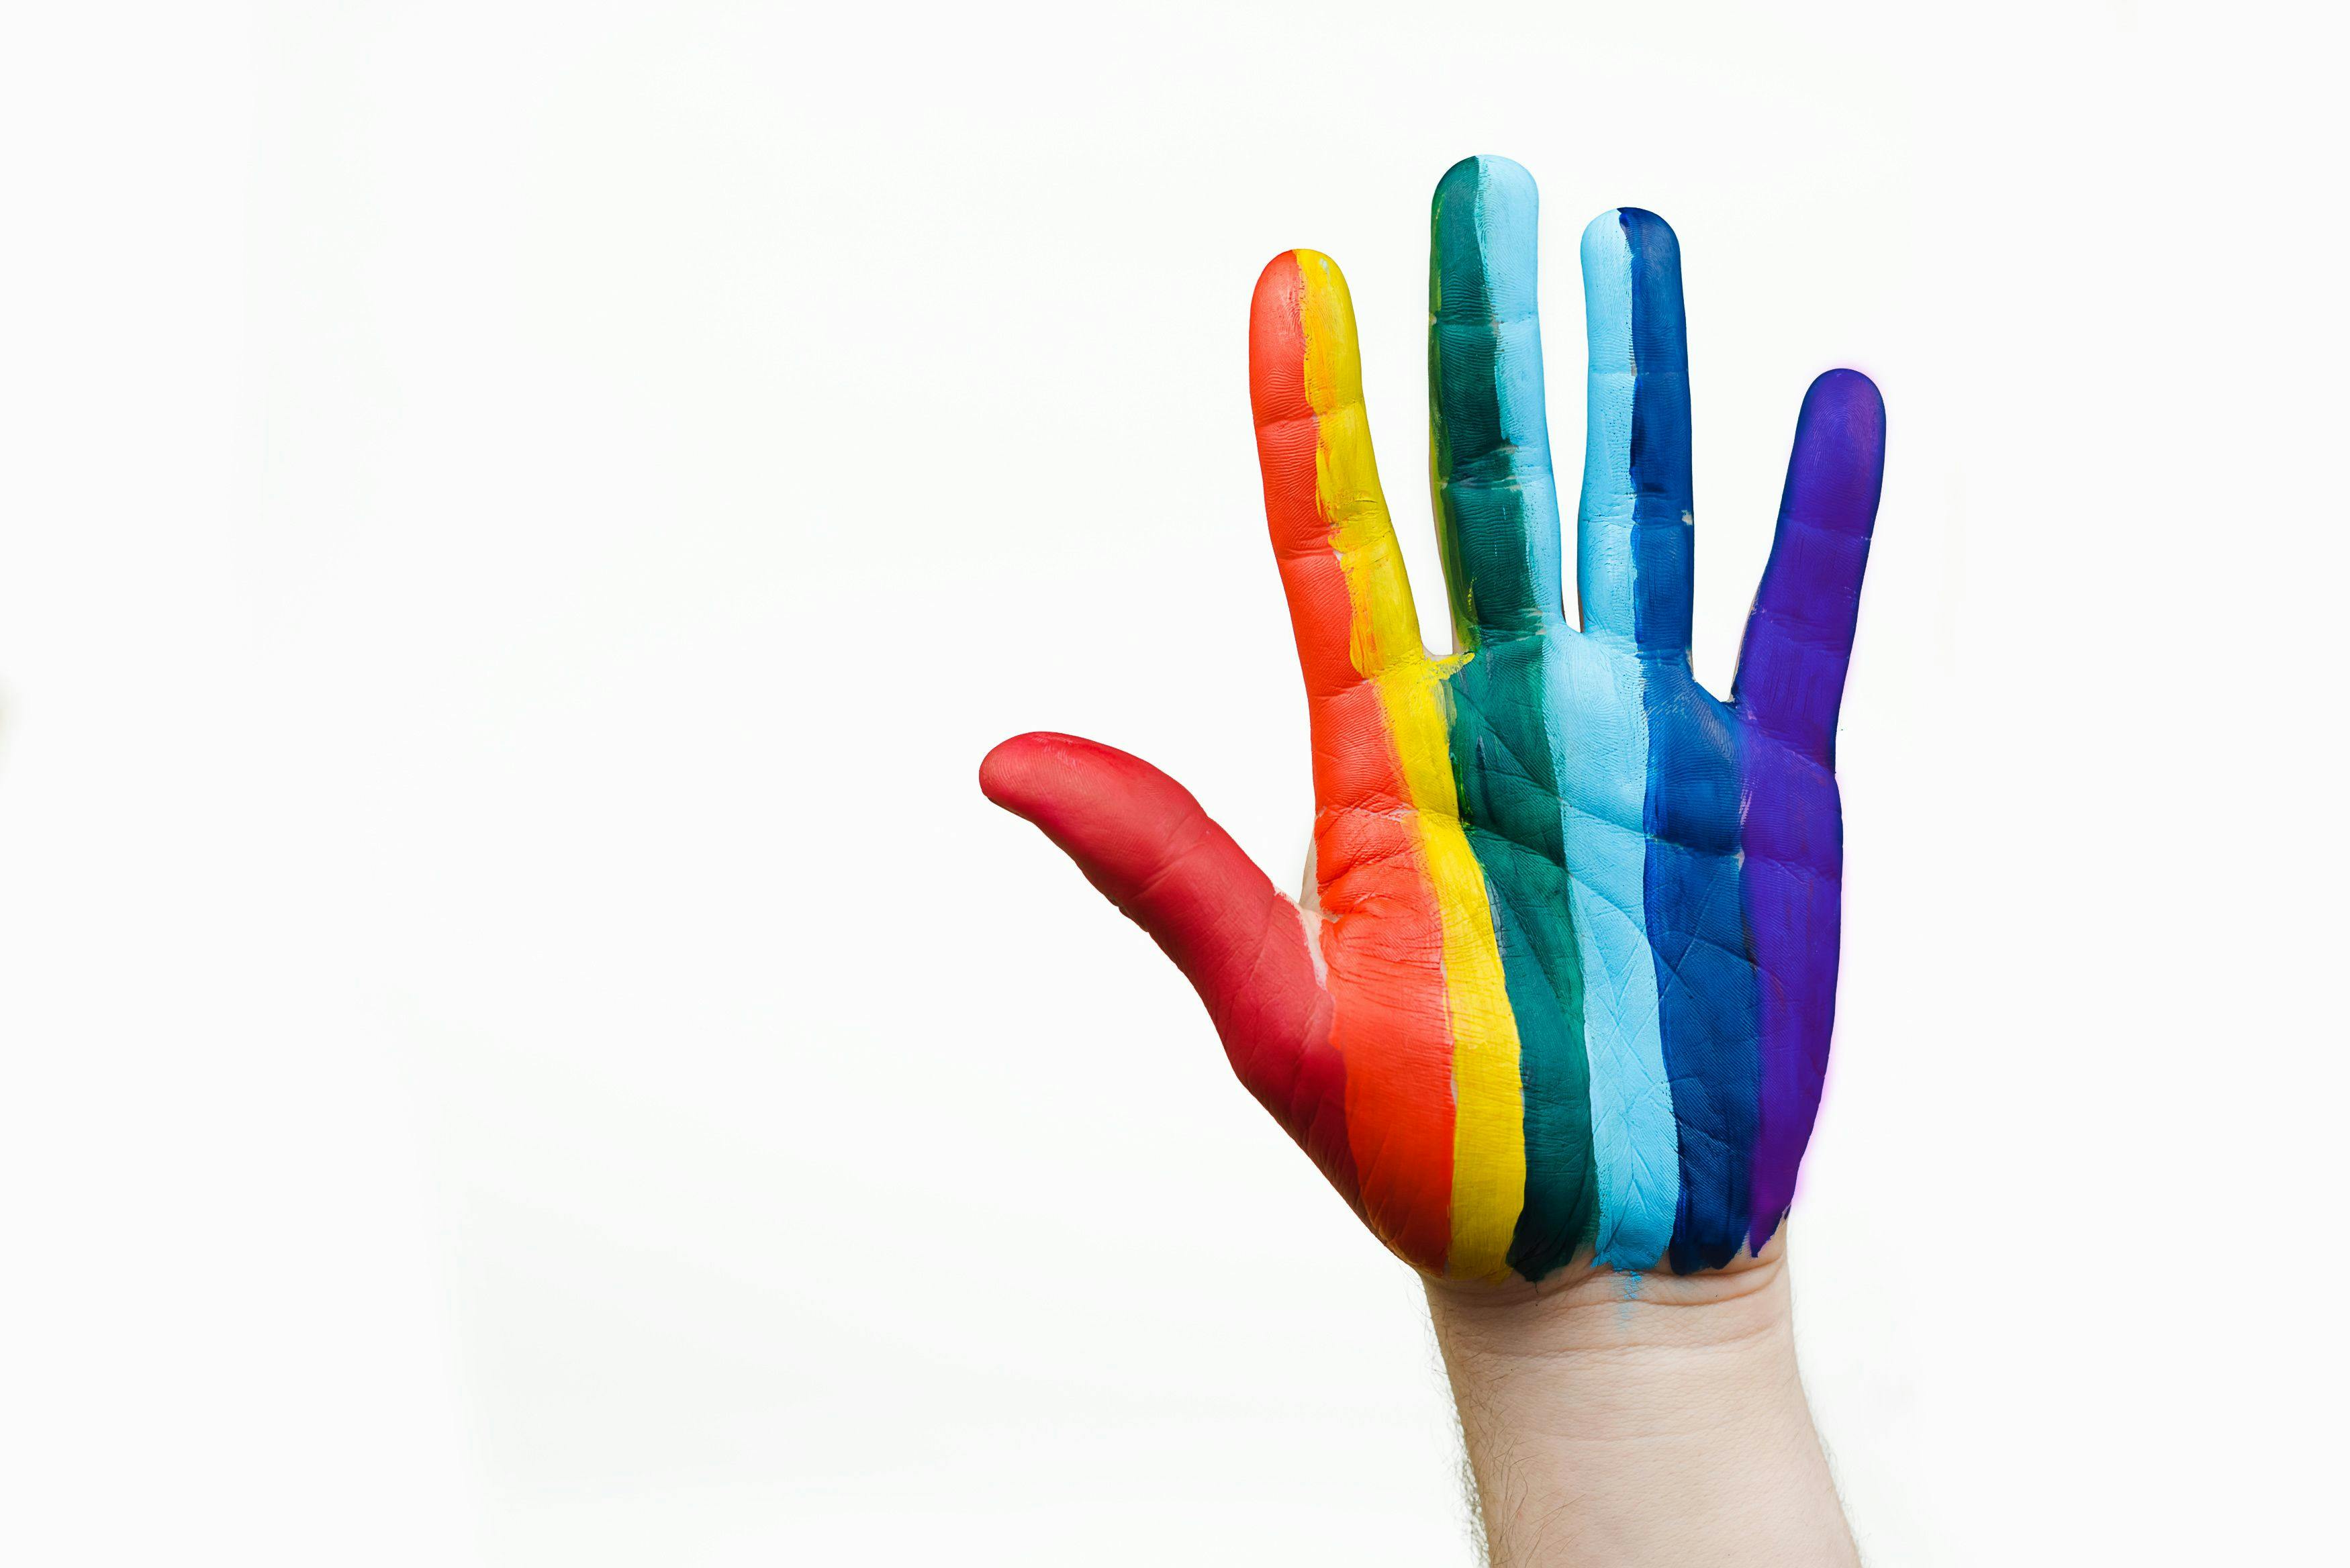 Bridging the LGBTQI Gap in Care: Why Psychiatrists Need To Do More To Treat These At-Risk Communities